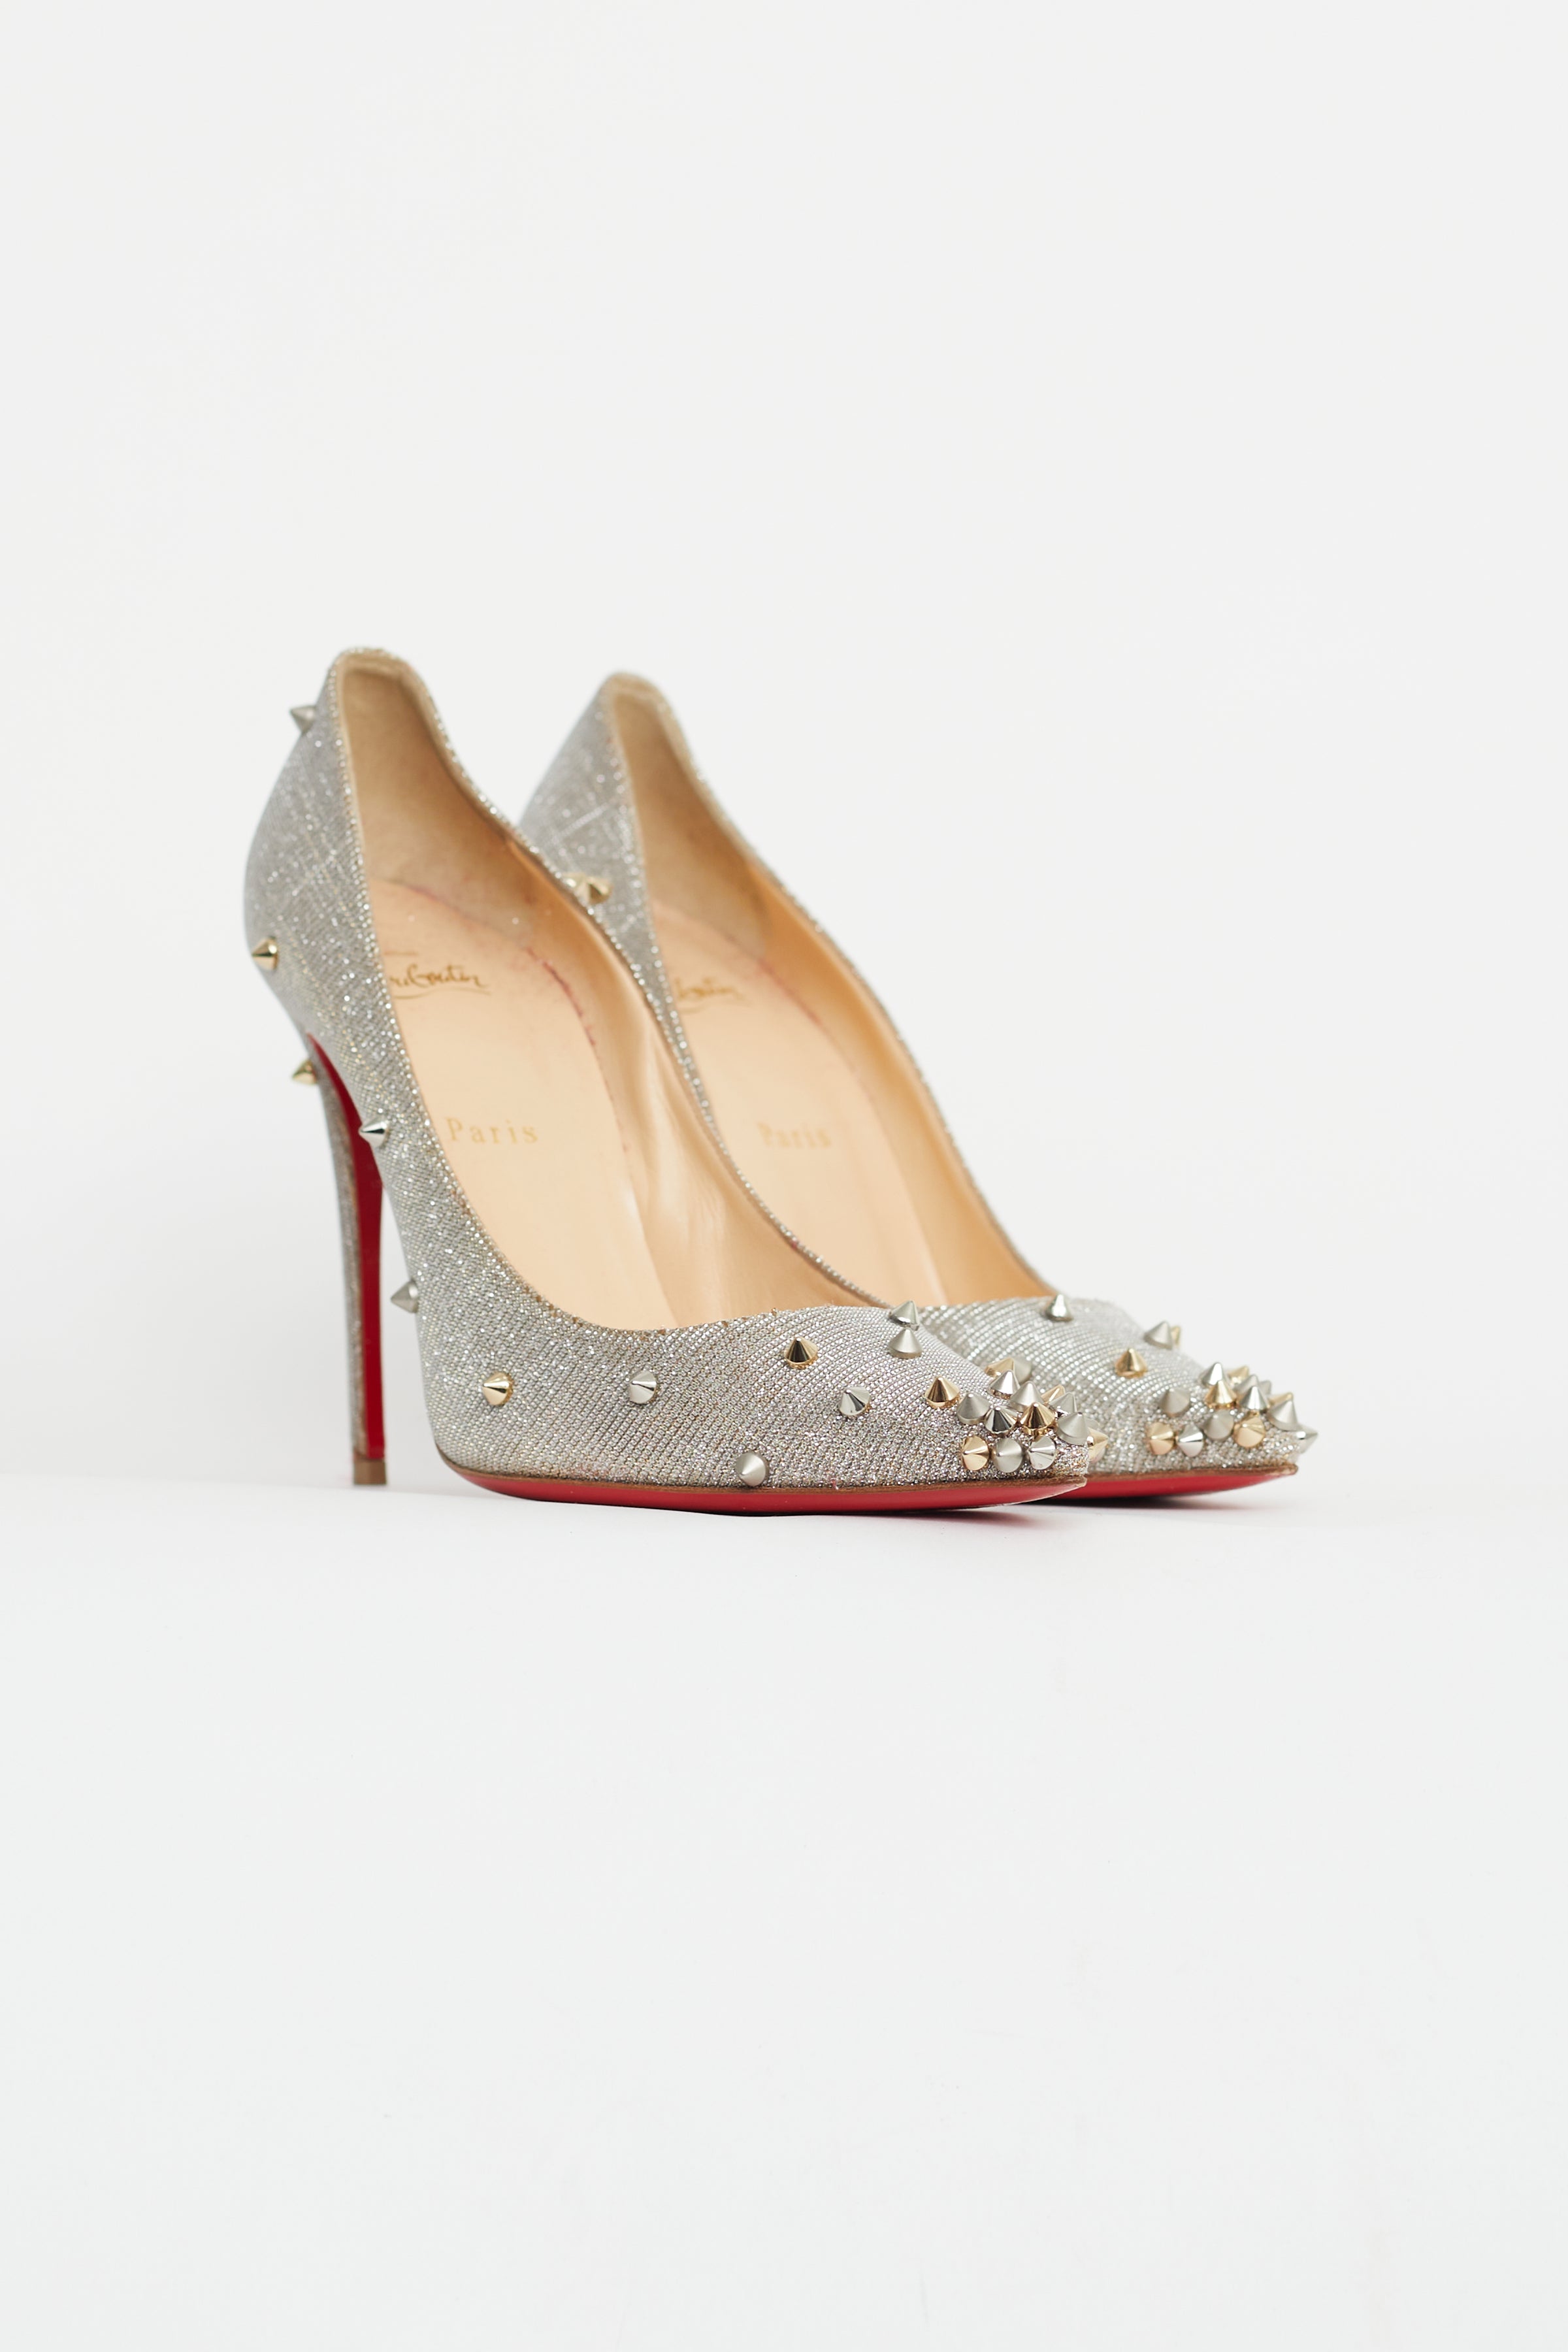 CHRISTIAN LOUBOUTIN So Me 85 studded patent-leather wedge sandals |  NET-A-PORTER